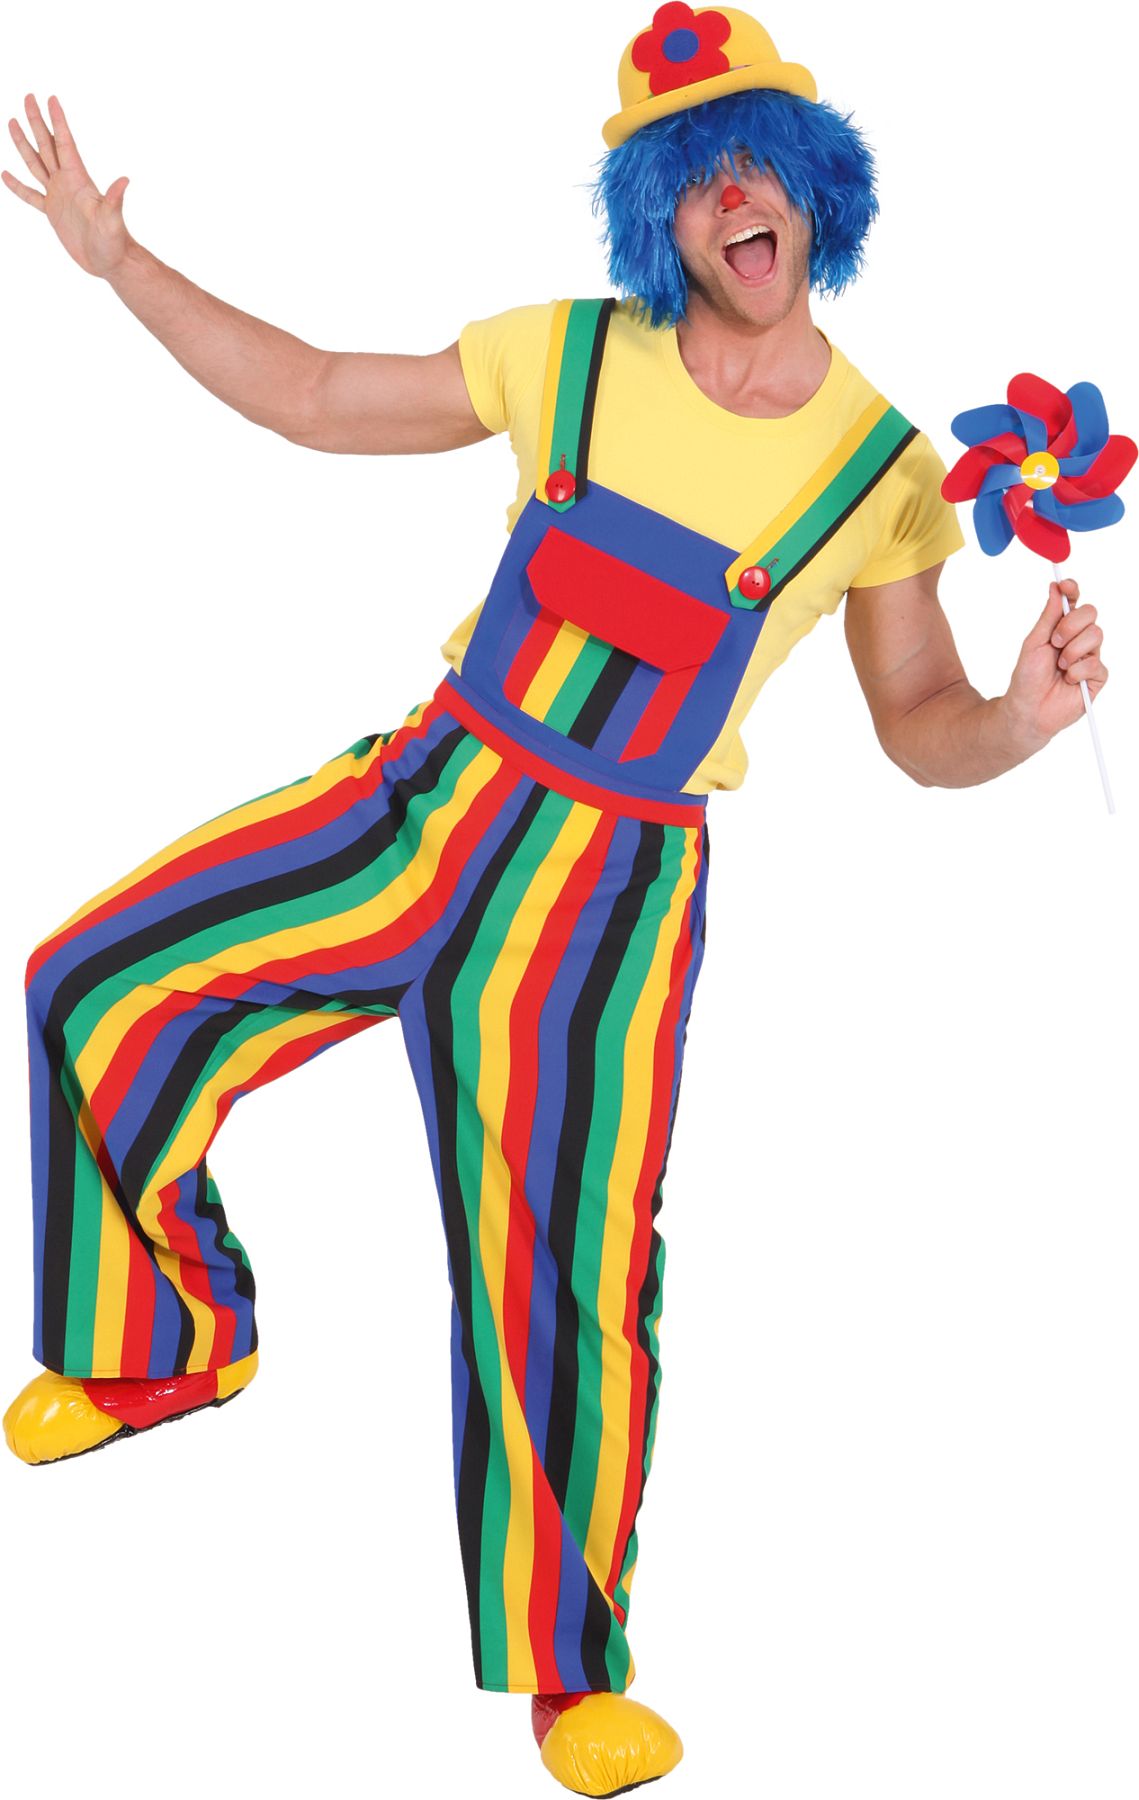 Clown pants with stripes